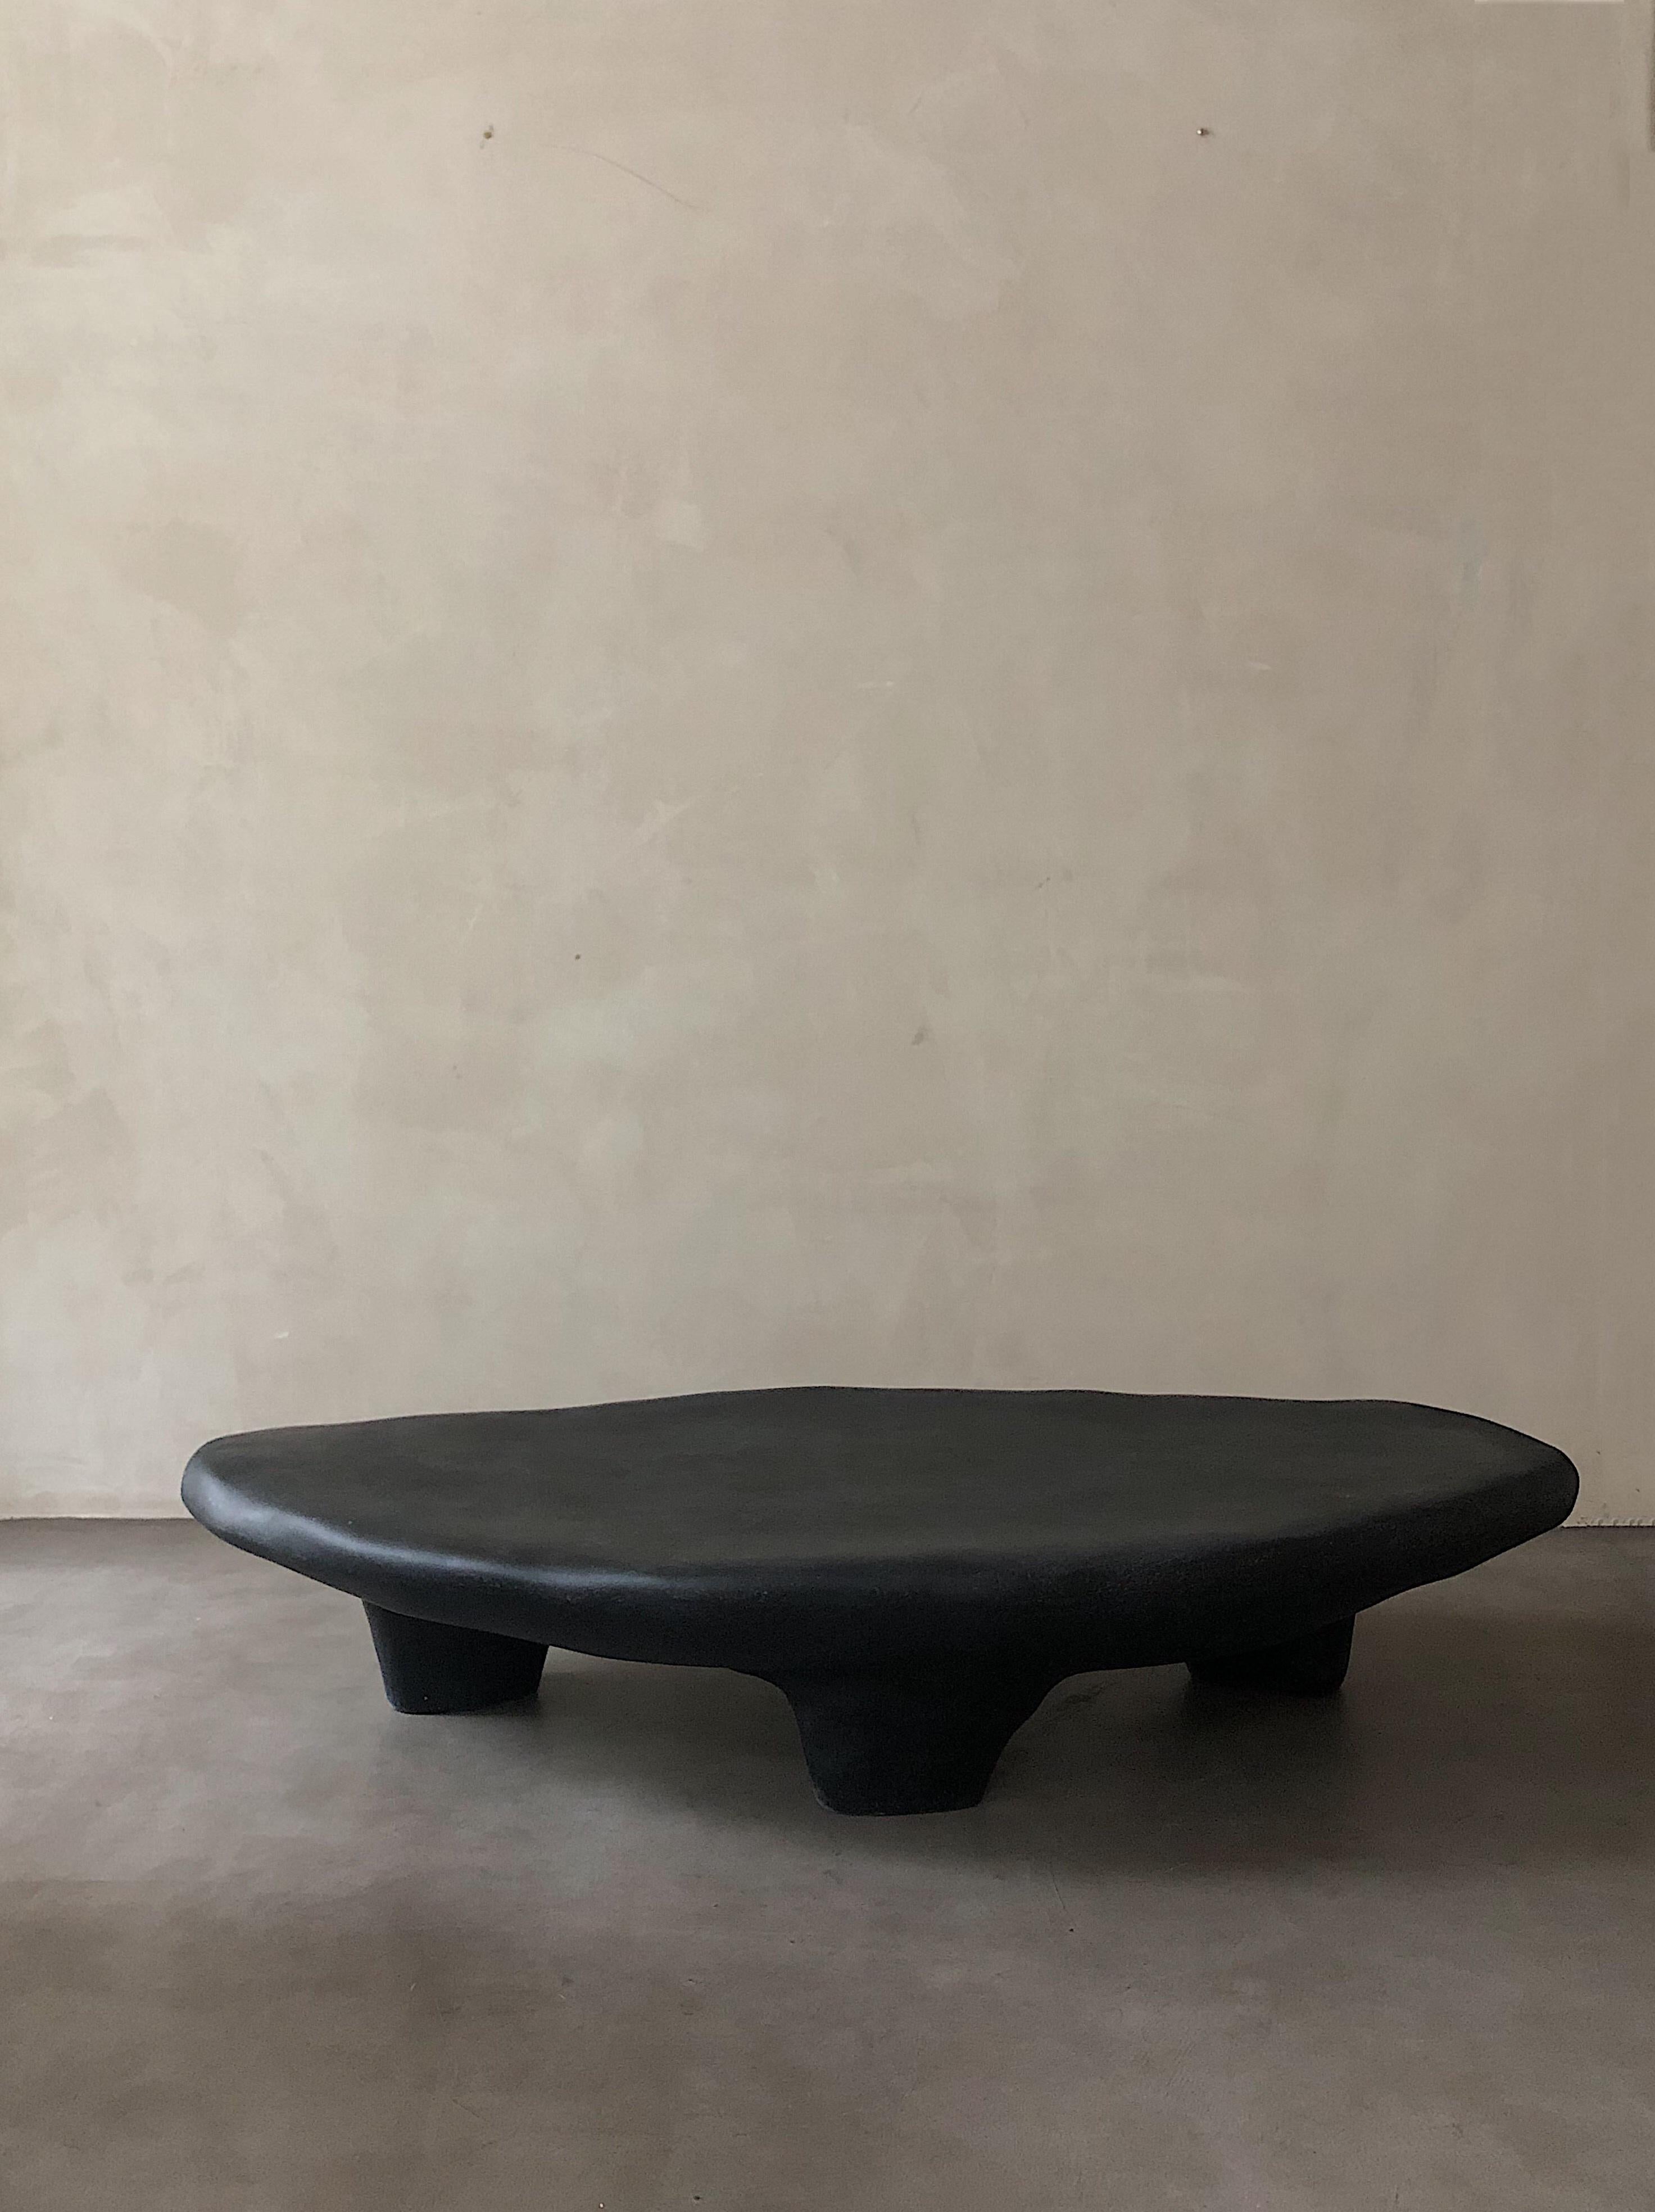 Black tripod coffee table by Karstudio.
Materials: FRP.
Dimensions: 150 x 85 x 30 cm.

This piece is suitable for outdoor use.


Inspired by three-leg utensils which were the first creation of human being in ancient times. Triangle structure and the